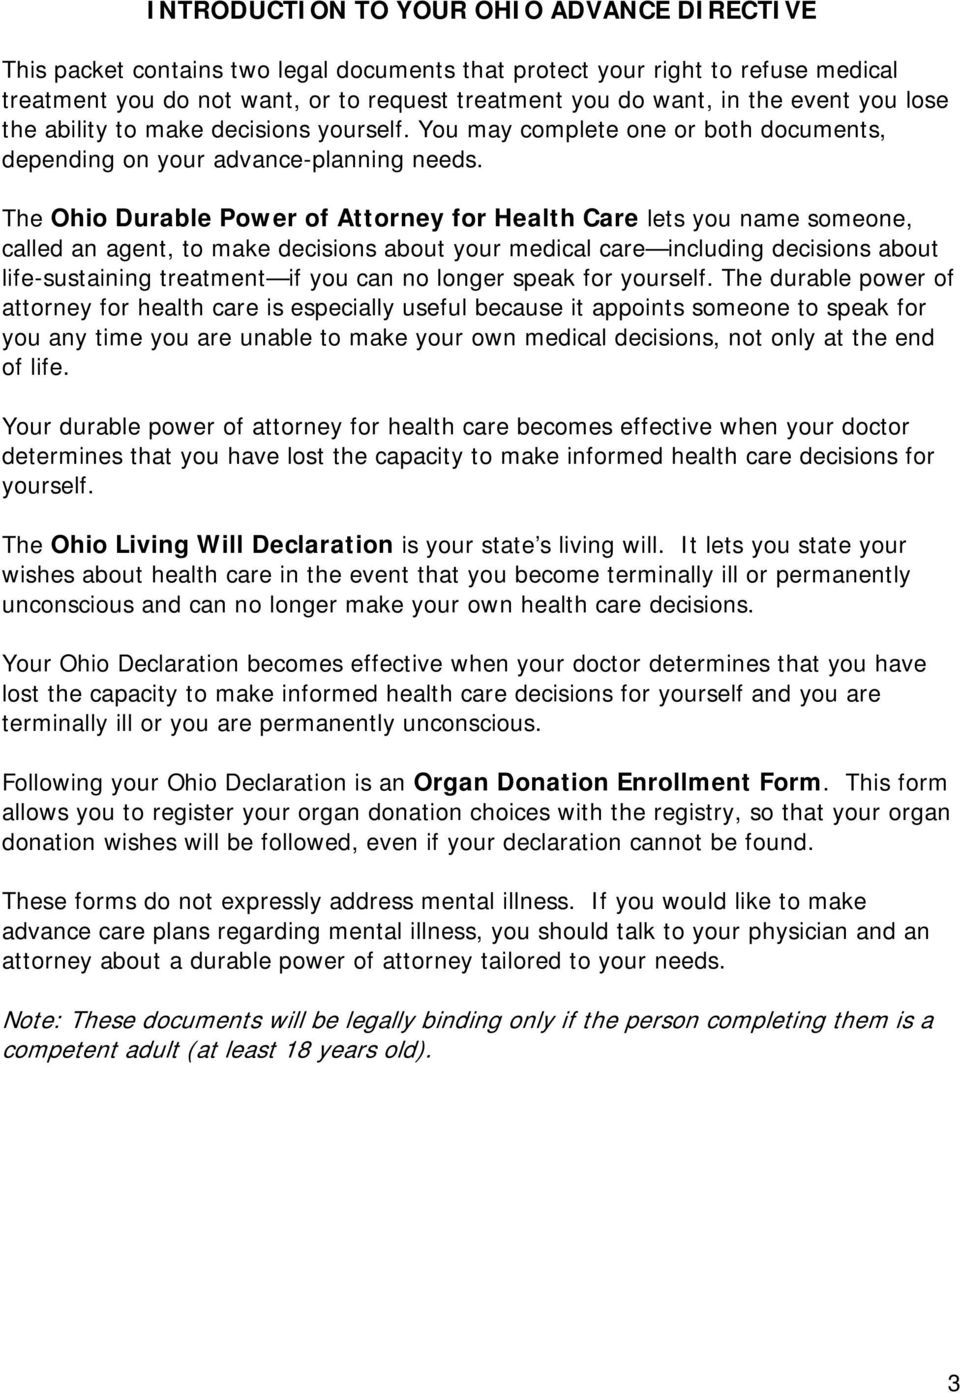 The Ohio Durable Power of Attorney for Health Care lets you name someone, called an agent, to make decisions about your medical care including decisions about life-sustaining treatment if you can no